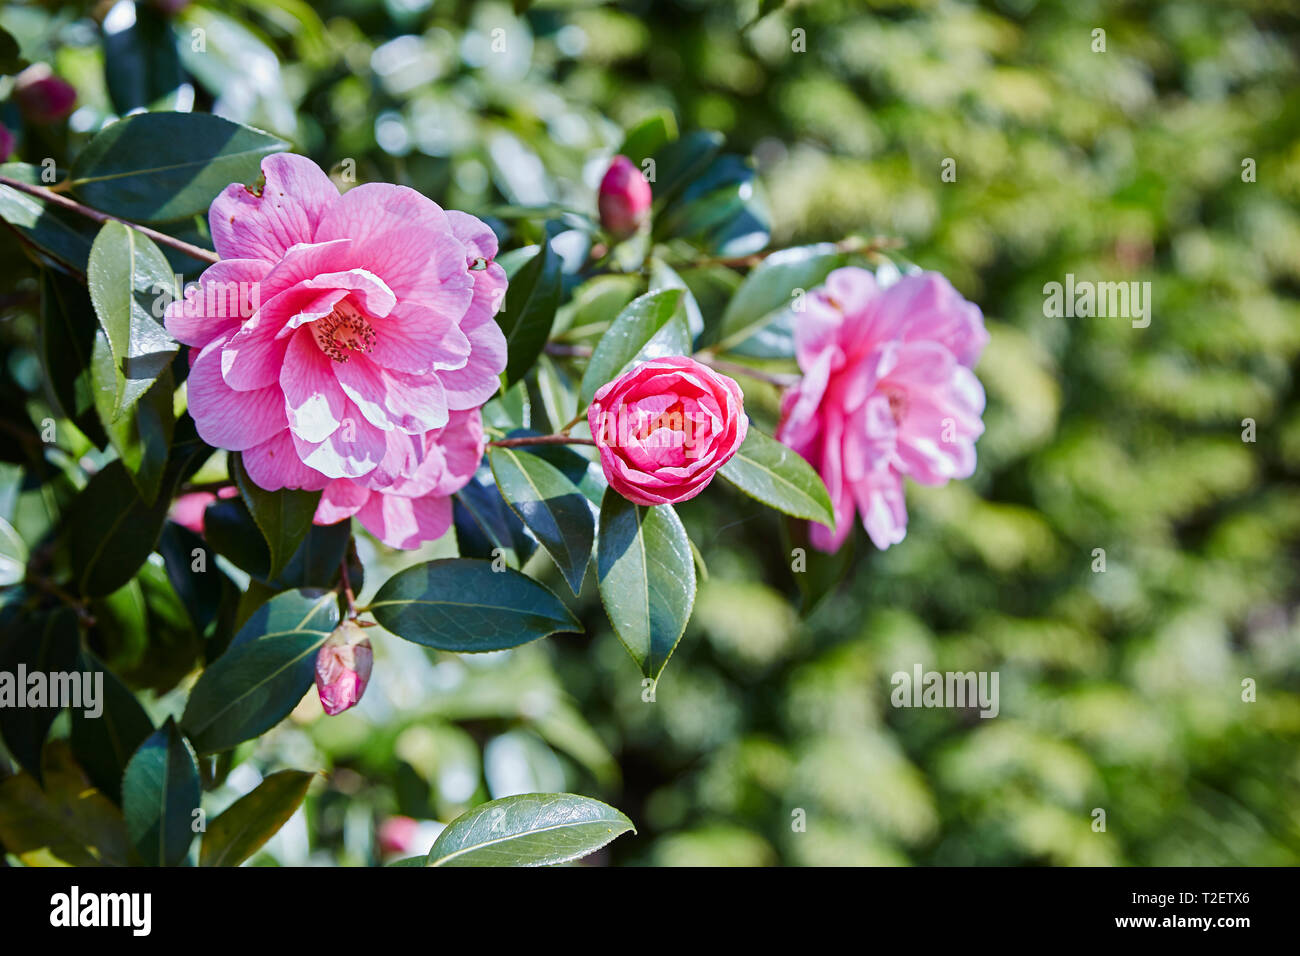 A detail of flowers caled Donation on a shrub in spring, Stock Photo